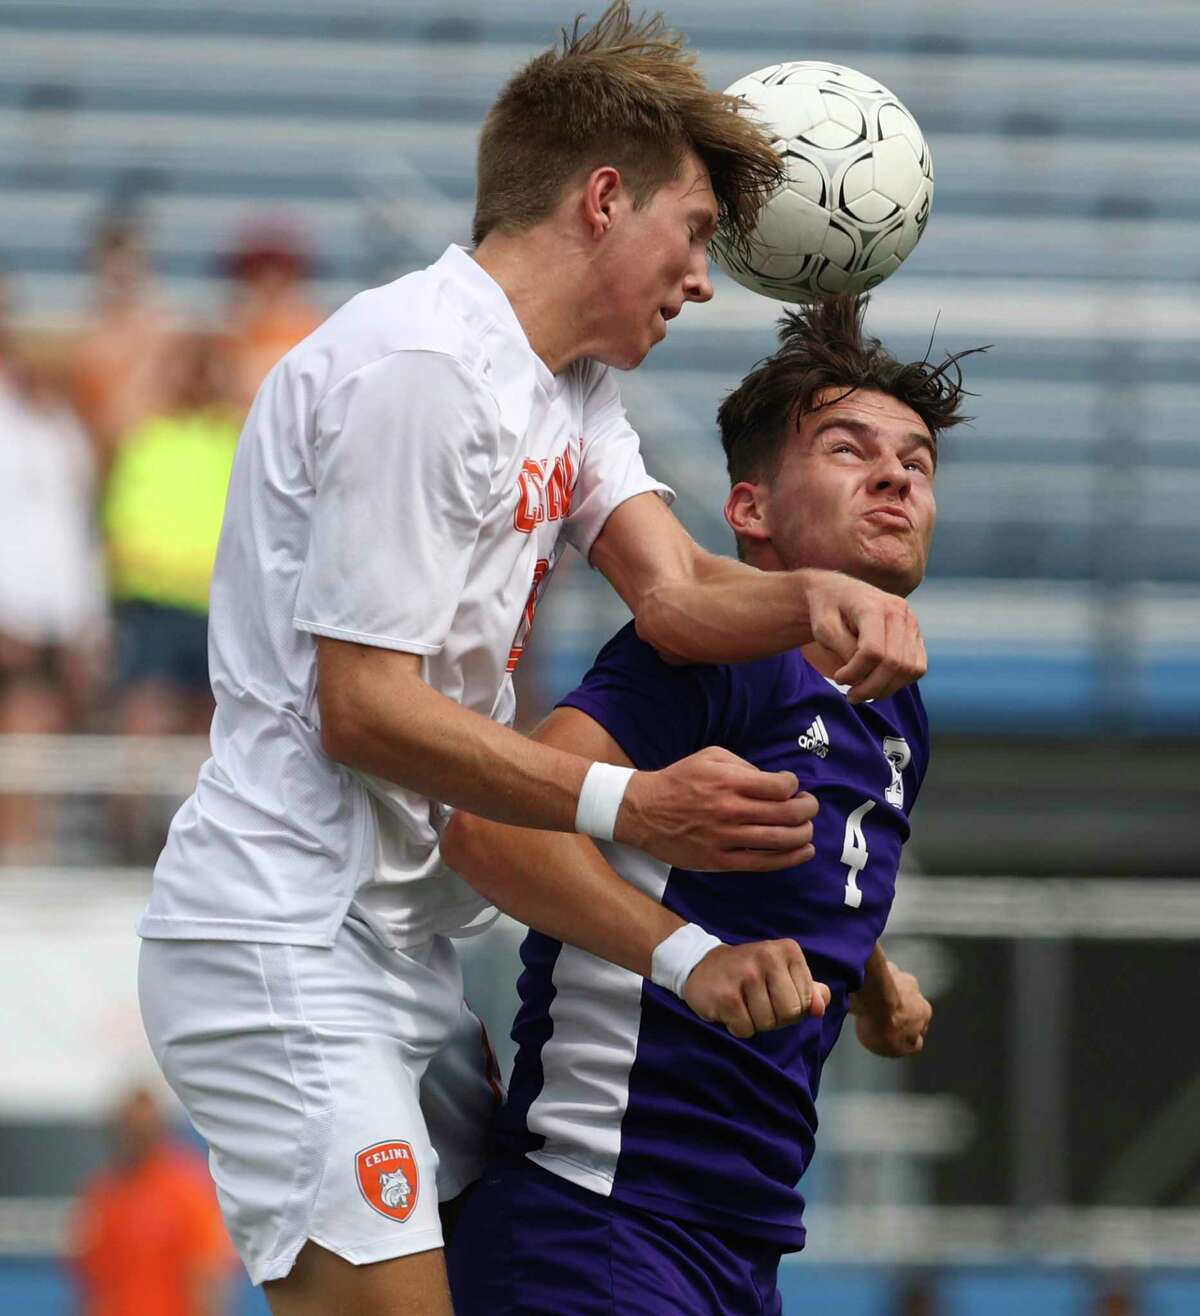 Boerne Greyhounds' Landon Murphy (04) contends for a header against Celina Bobcats' Kohyn Gough (10) in the Class 4A soccer state championship game in Georgetown on Friday, Apr. 15, 2022. Boerne defeated Celina, 2-1, in overtime to win their second and back-to-back state title.